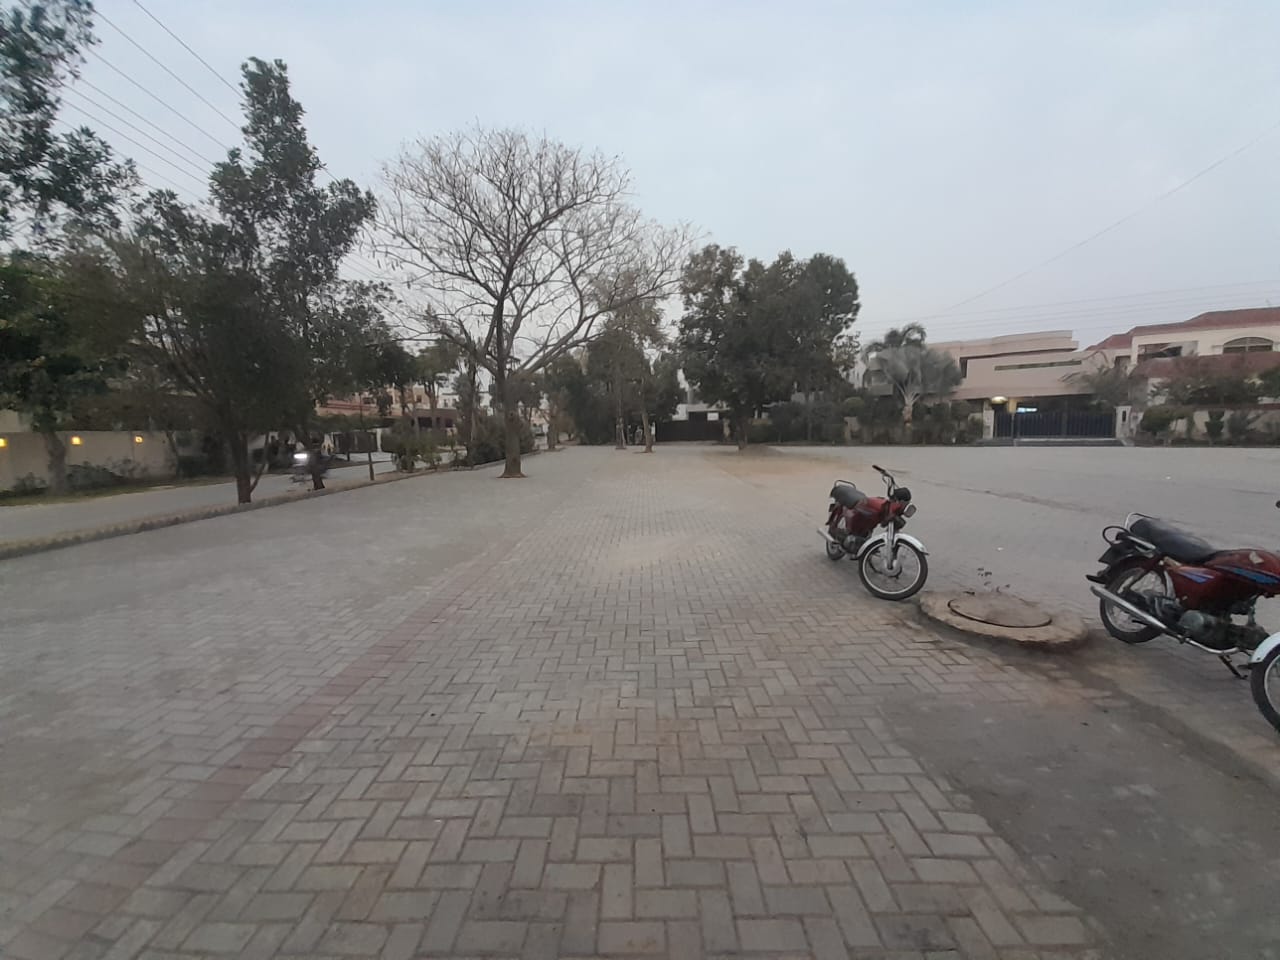 2 Marla Apartment For Rent DHA Phase 4 Lahore